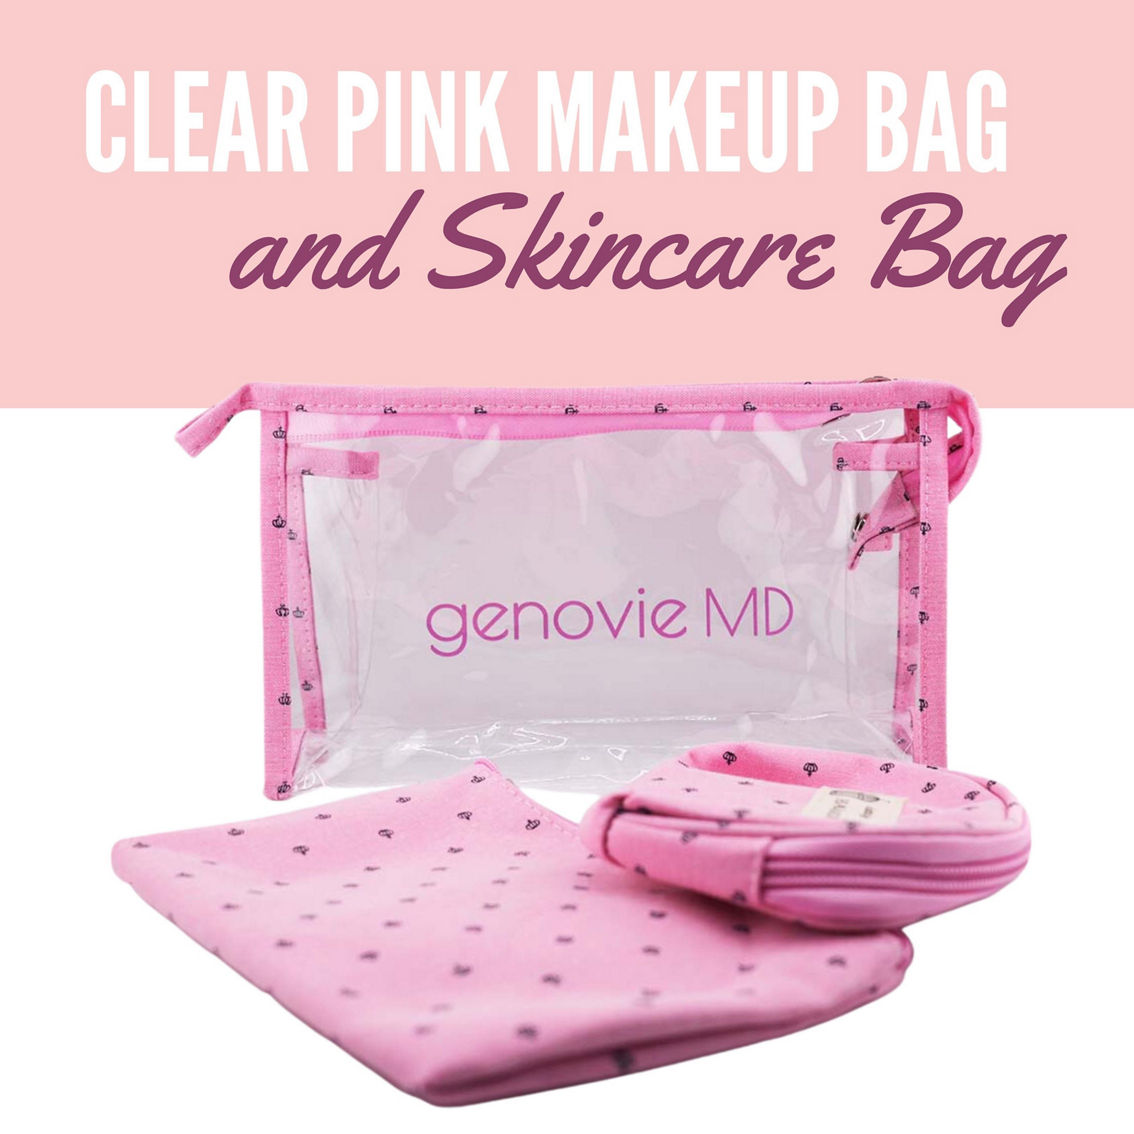 Genovie MD Clear Pink Makeup and Skincare Toiletry Bag for Women, 3 Piece Set - Image 3 of 5